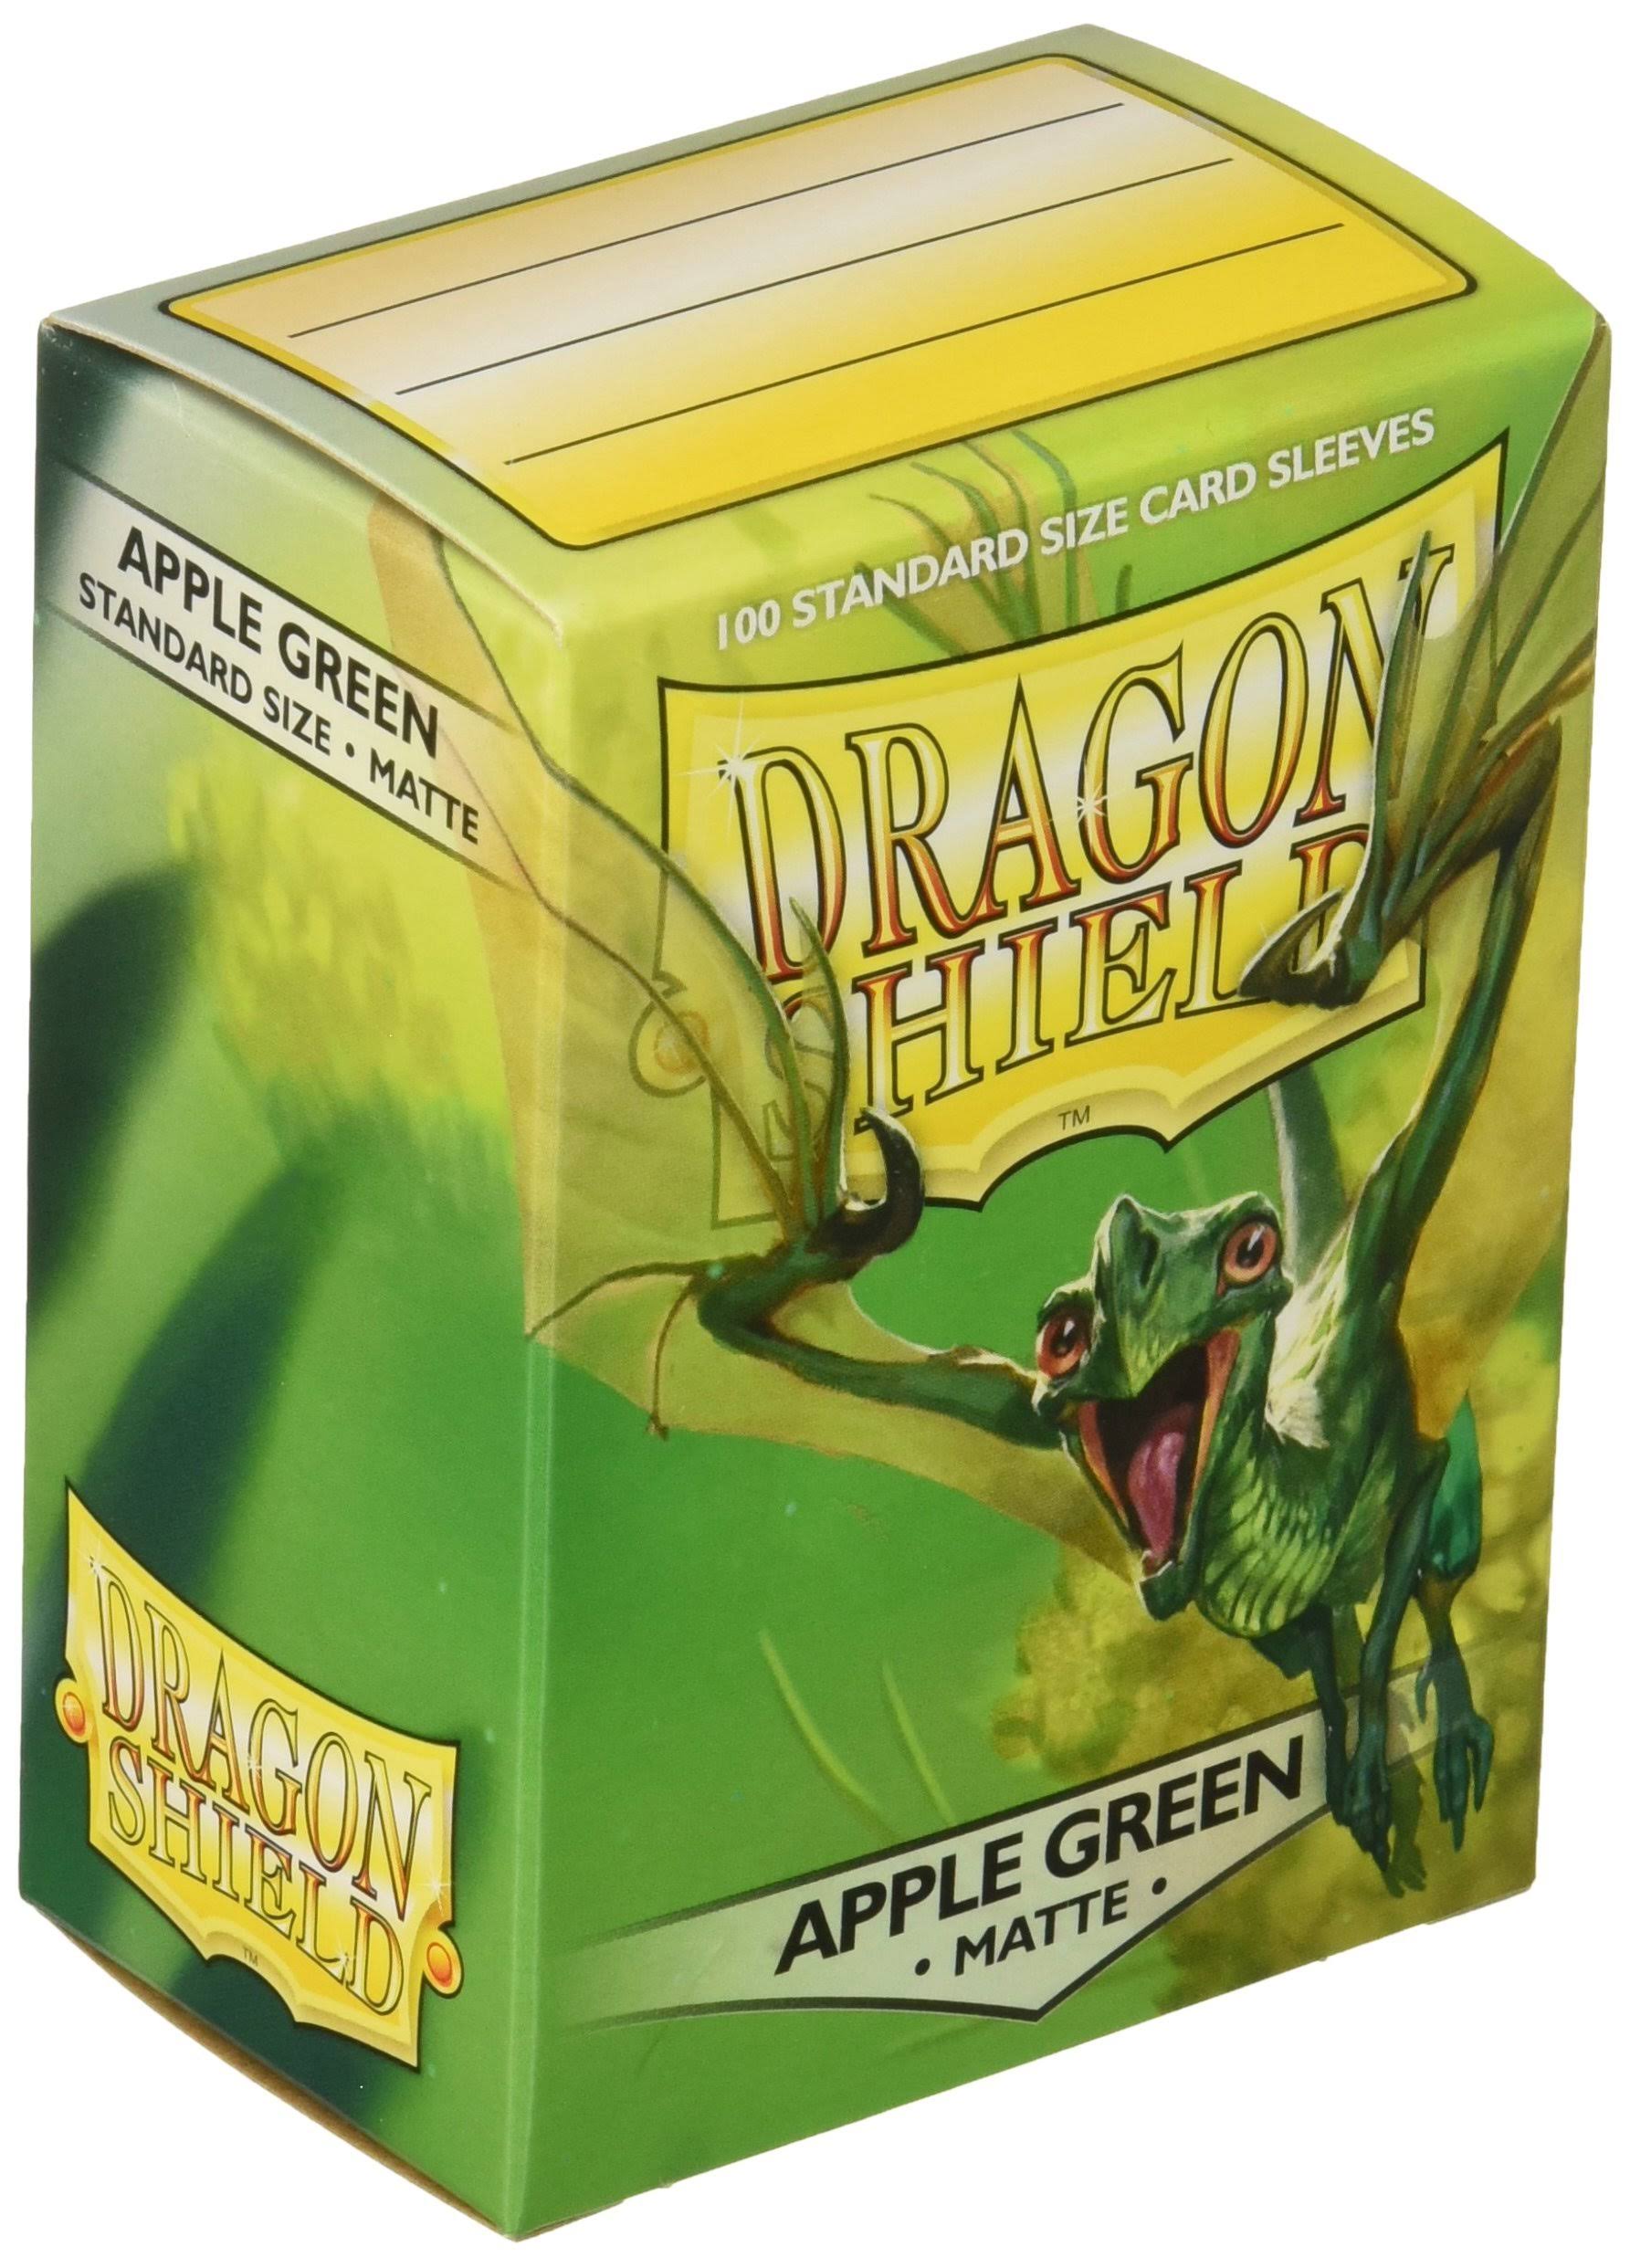 Dragon Shield Standard Trading Card Sleeves - Matte, Apple Green, 100 Count